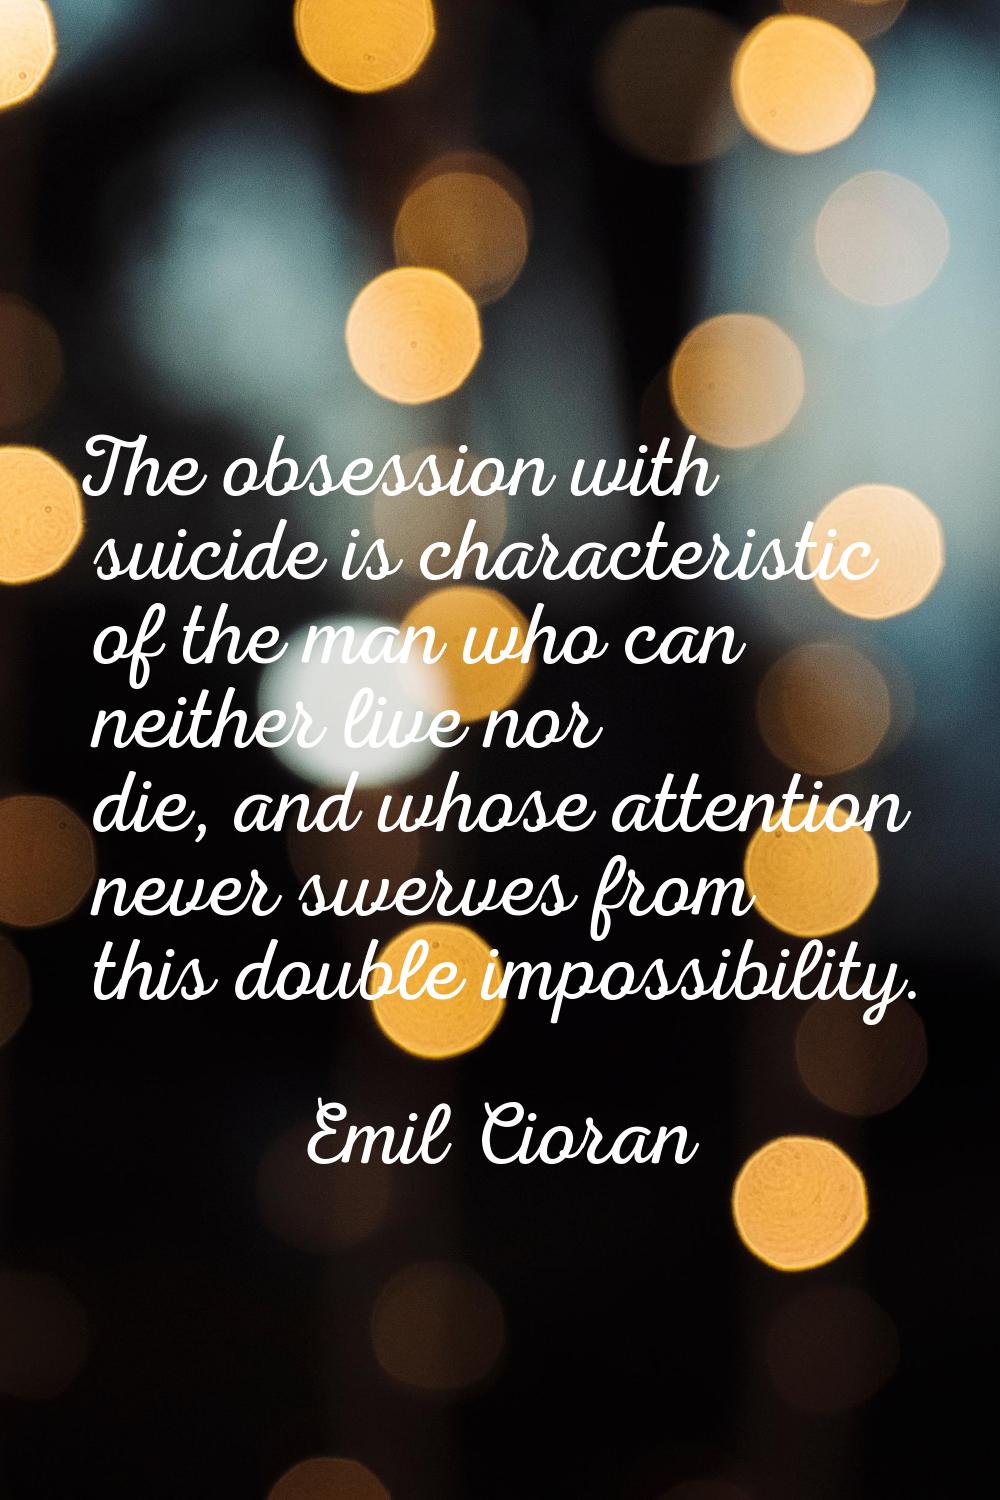 The obsession with suicide is characteristic of the man who can neither live nor die, and whose att